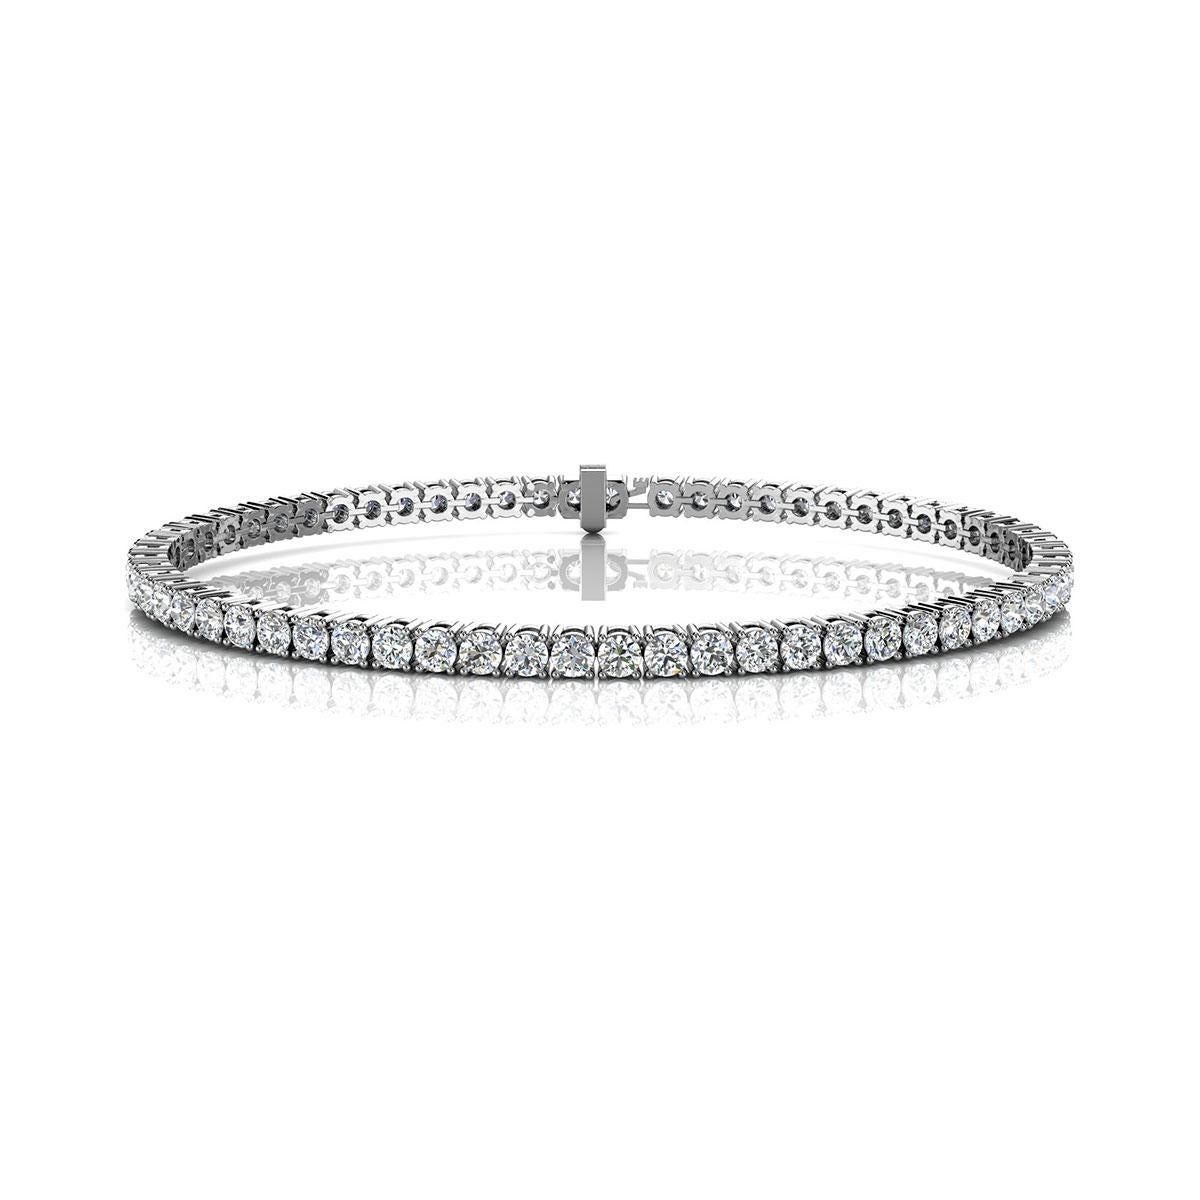 A timeless four prongs diamonds tennis bracelet. Experience the Difference!

Product details: 

Center Gemstone Type: NATURAL DIAMOND
Center Gemstone Color: WHITE
Center Gemstone Shape: ROUND
Center Diamond Carat Weight: 3
Metal: 18K White